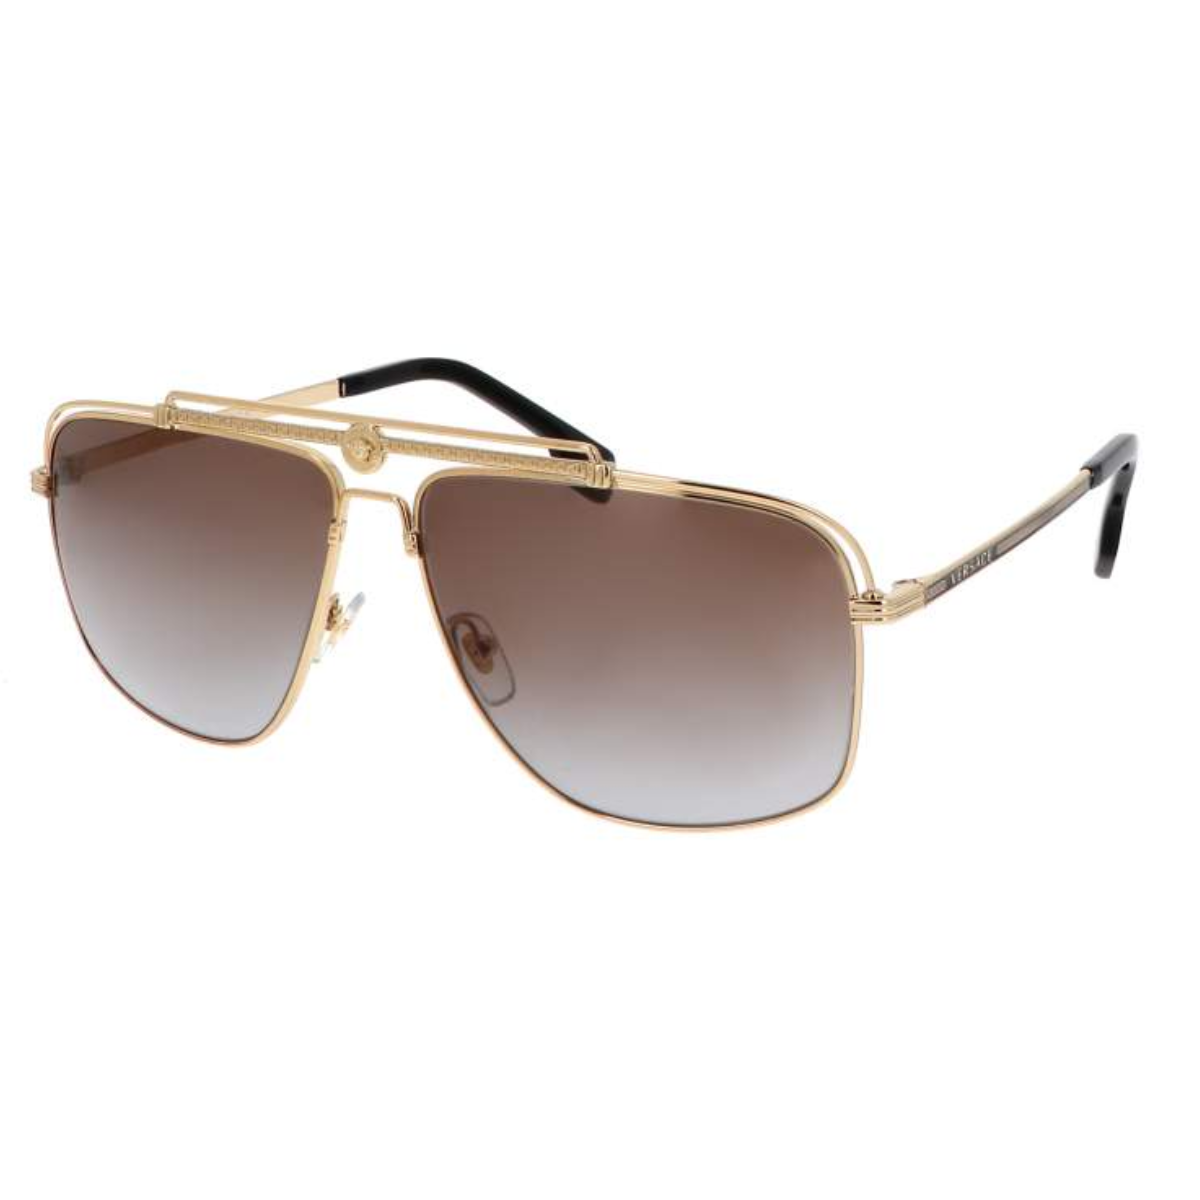 "Shop the fashionable Versace 2242 100287 Sunglasses at Optorium. Unisex brown gradient lens, black and gold temples. Elevate your style game! at optrium"